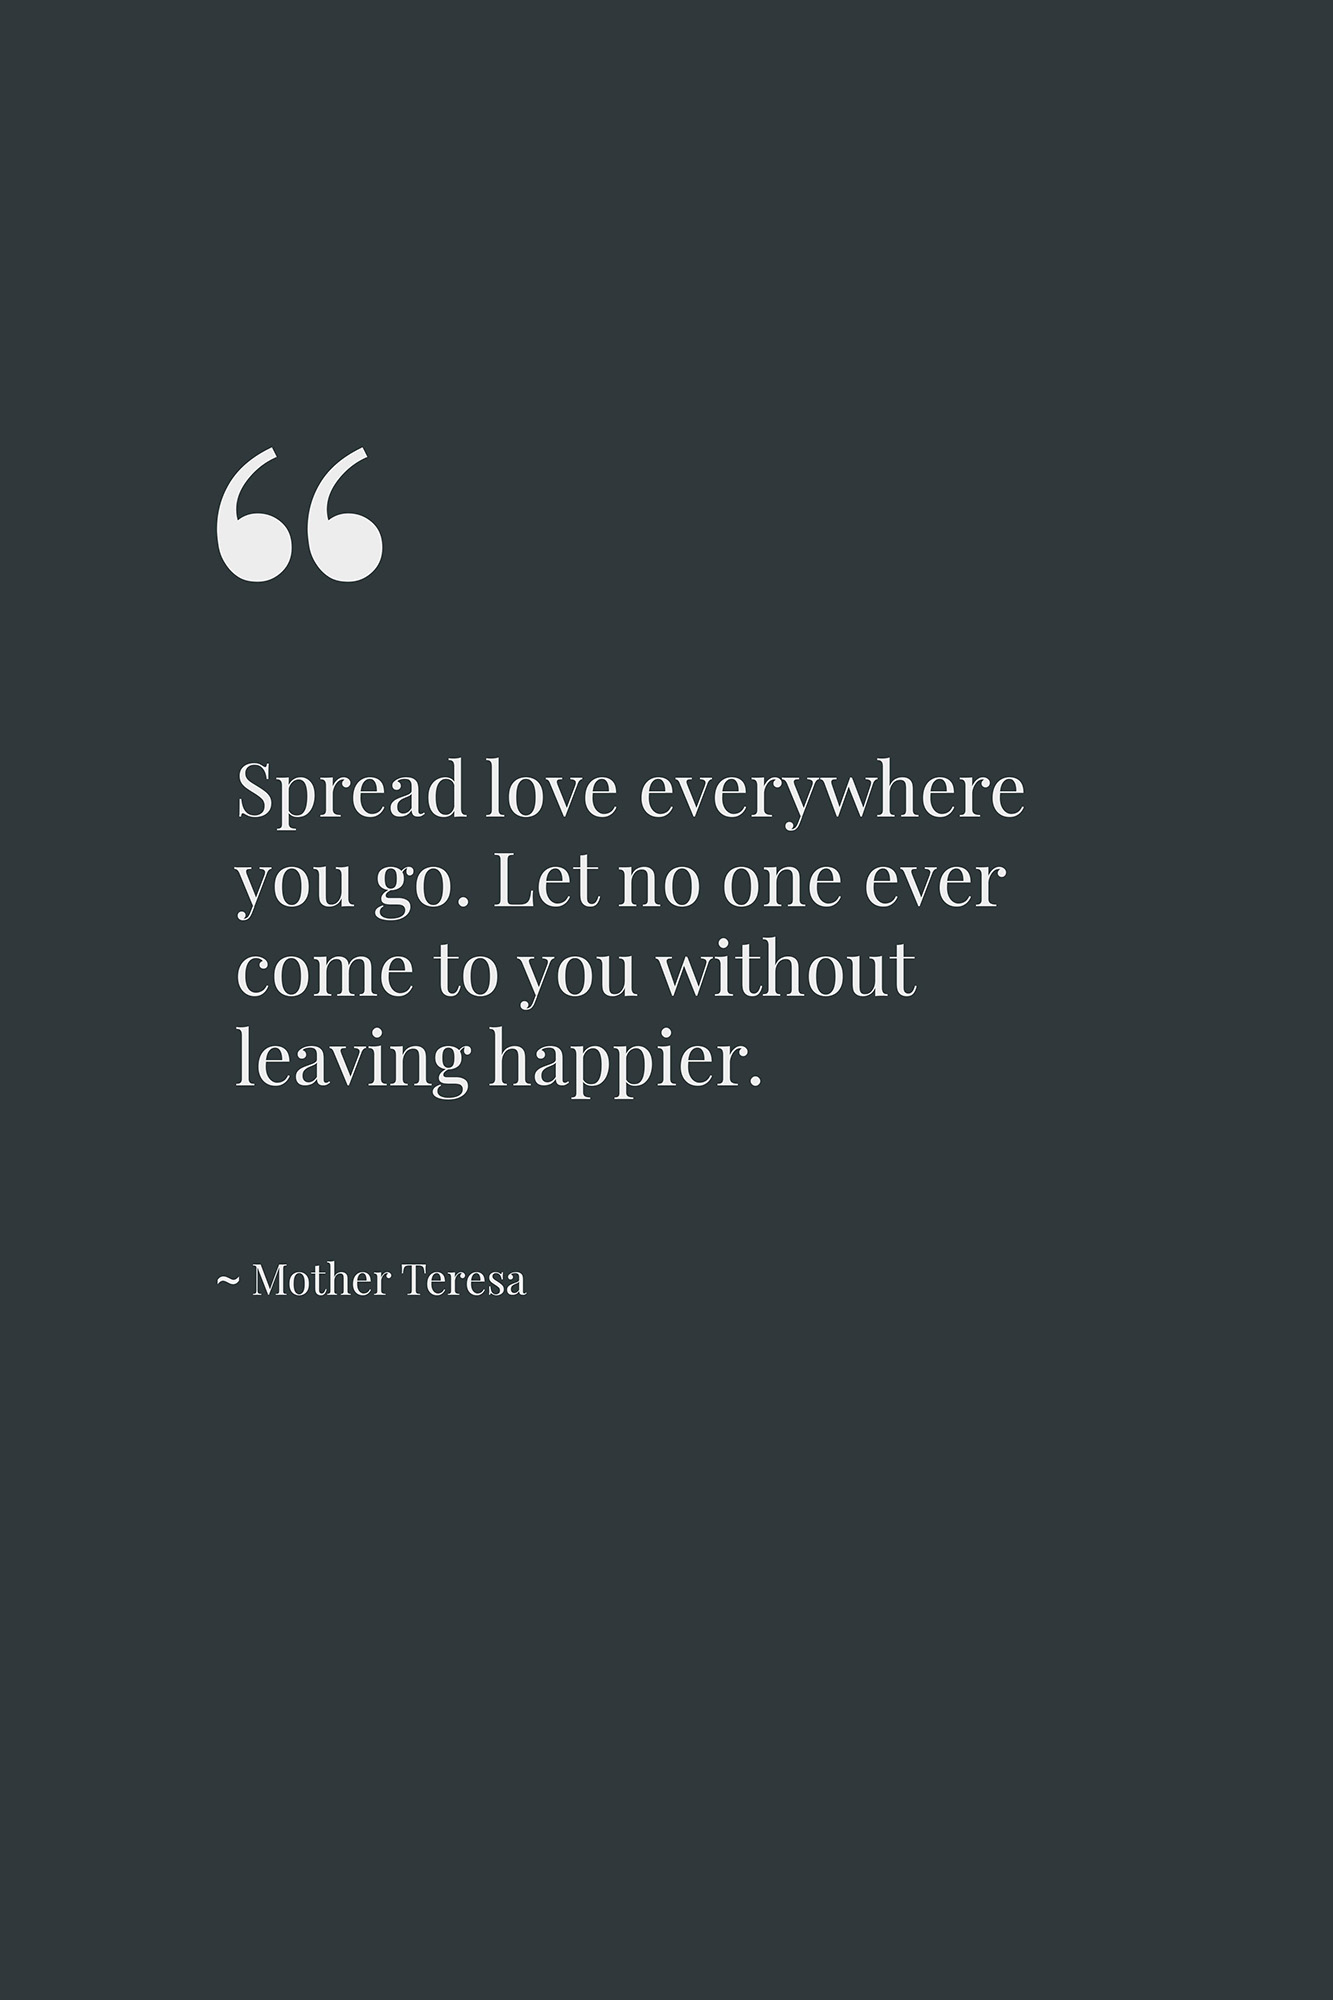 Spread love everywhere you go. Let no one ever come to you without leaving happier. ~ Mother Teresa